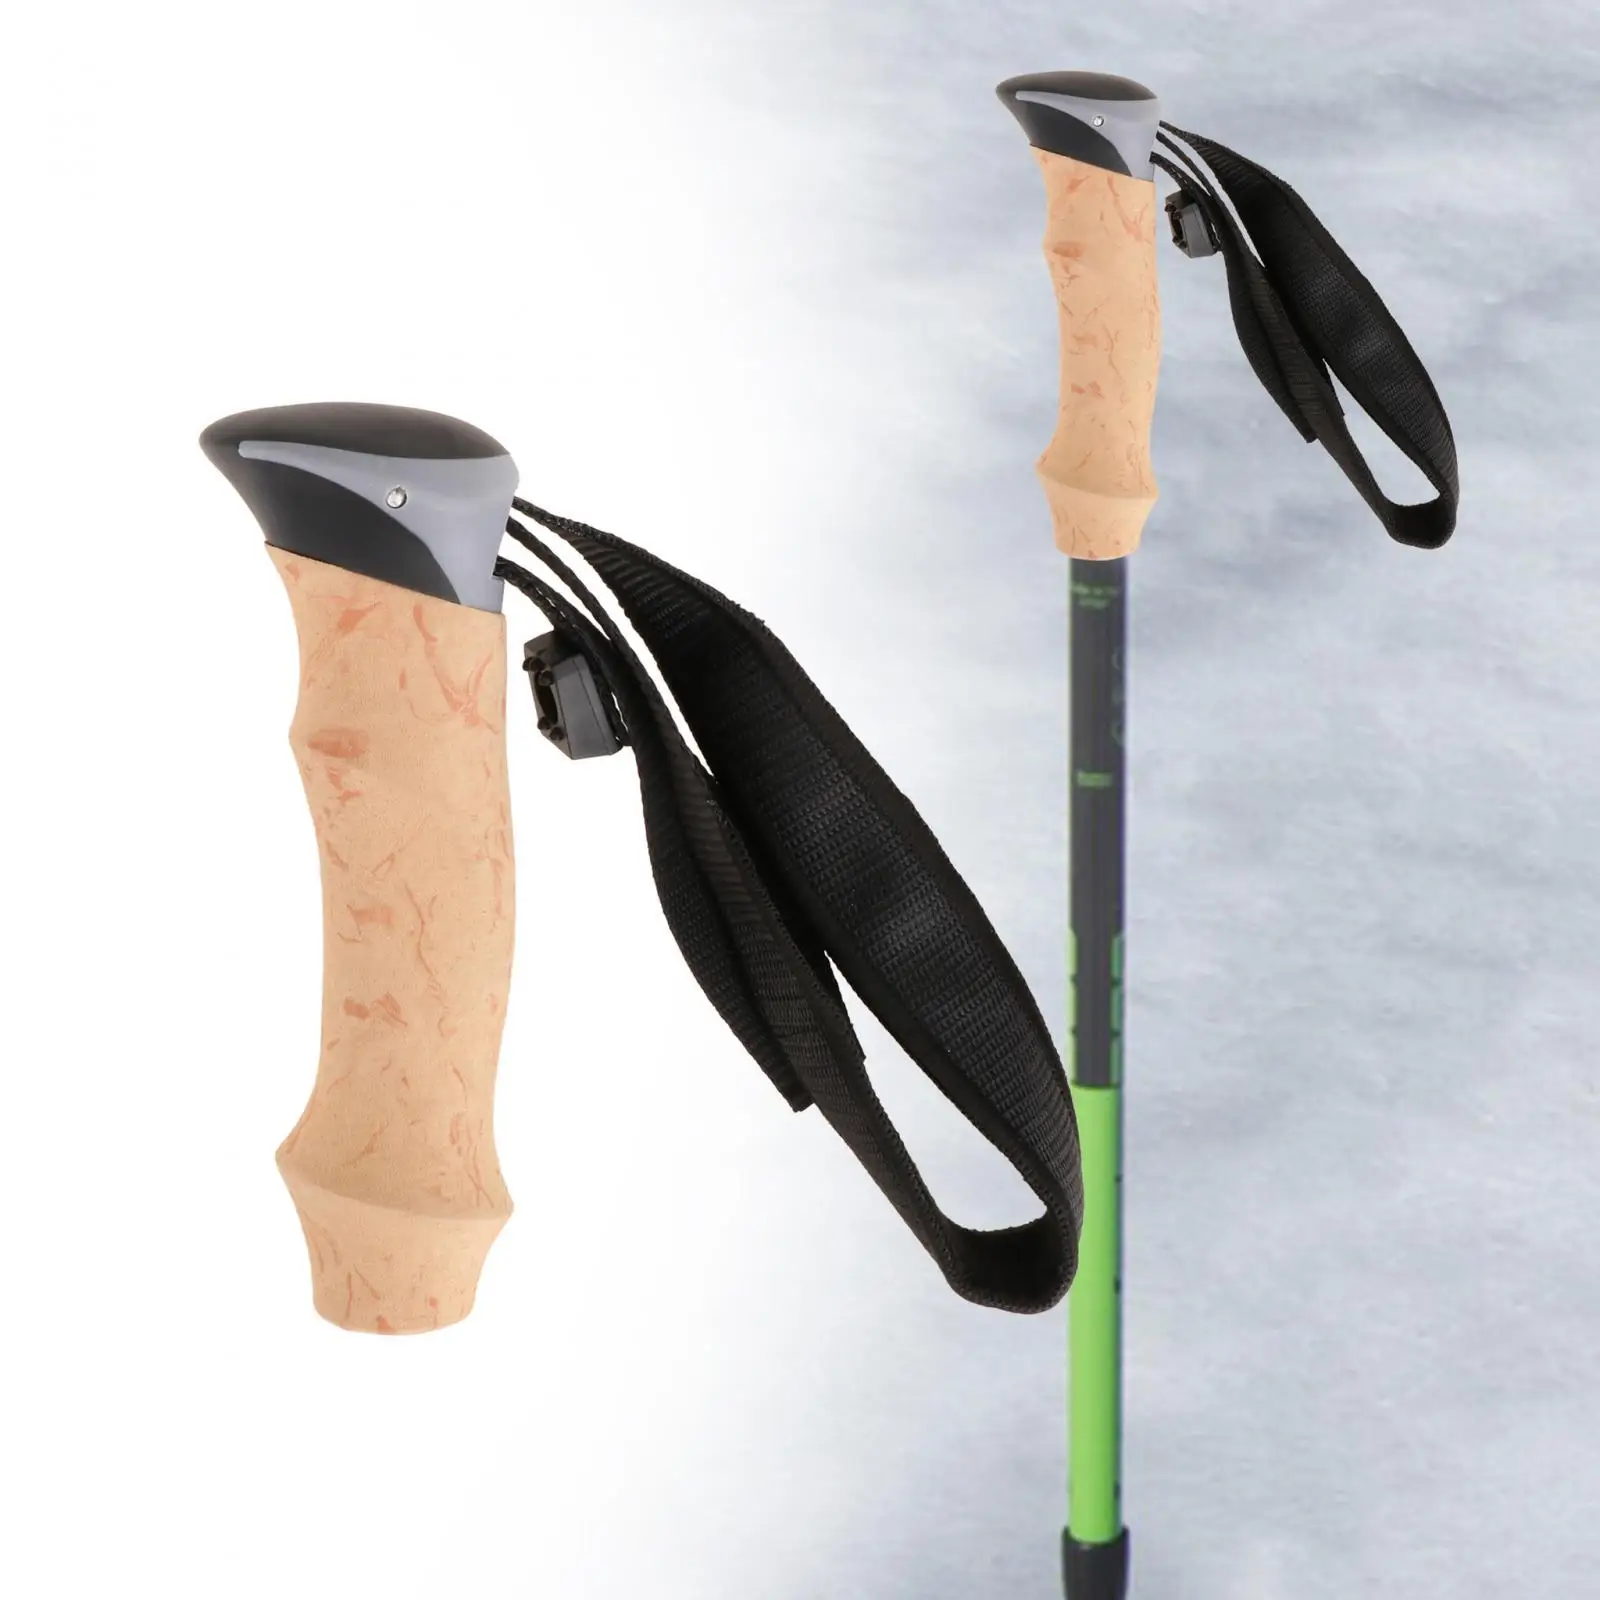 Walking Rod Hand Grip Hiking Pole Handle Grip for Outdoor Activities Camping